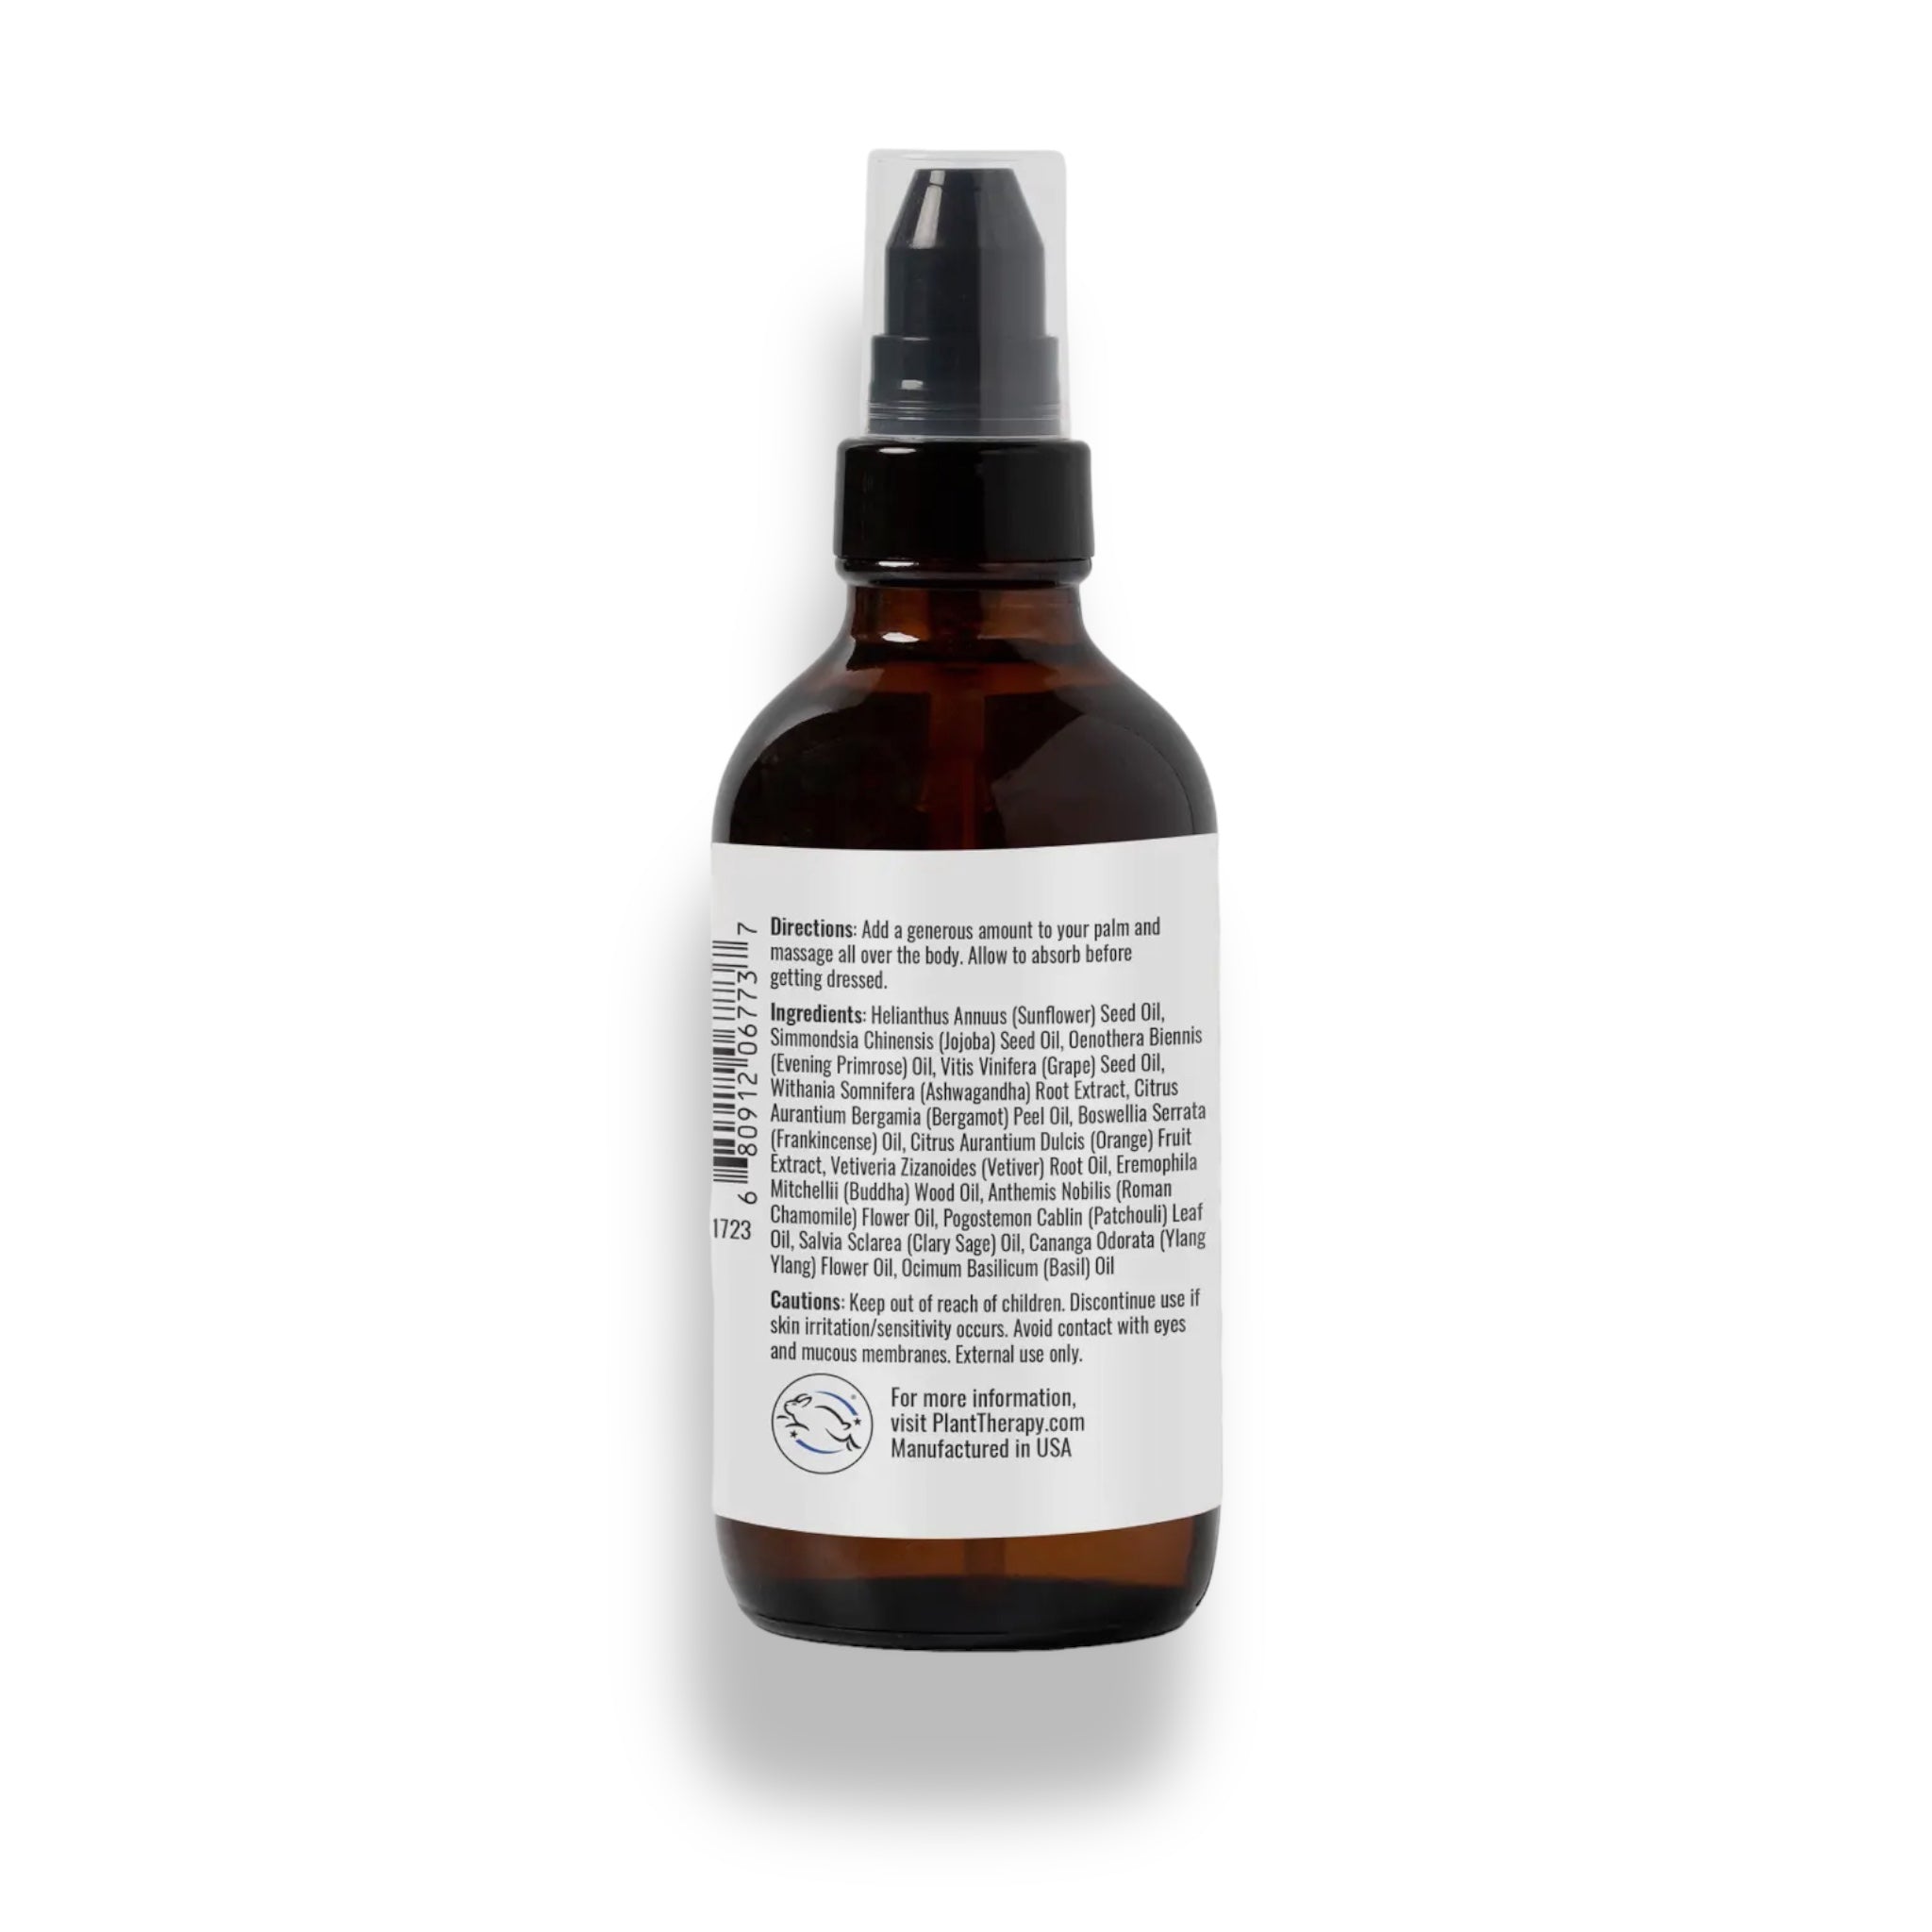 Stress Body Oil with Ashwagandha - Plant Therapy